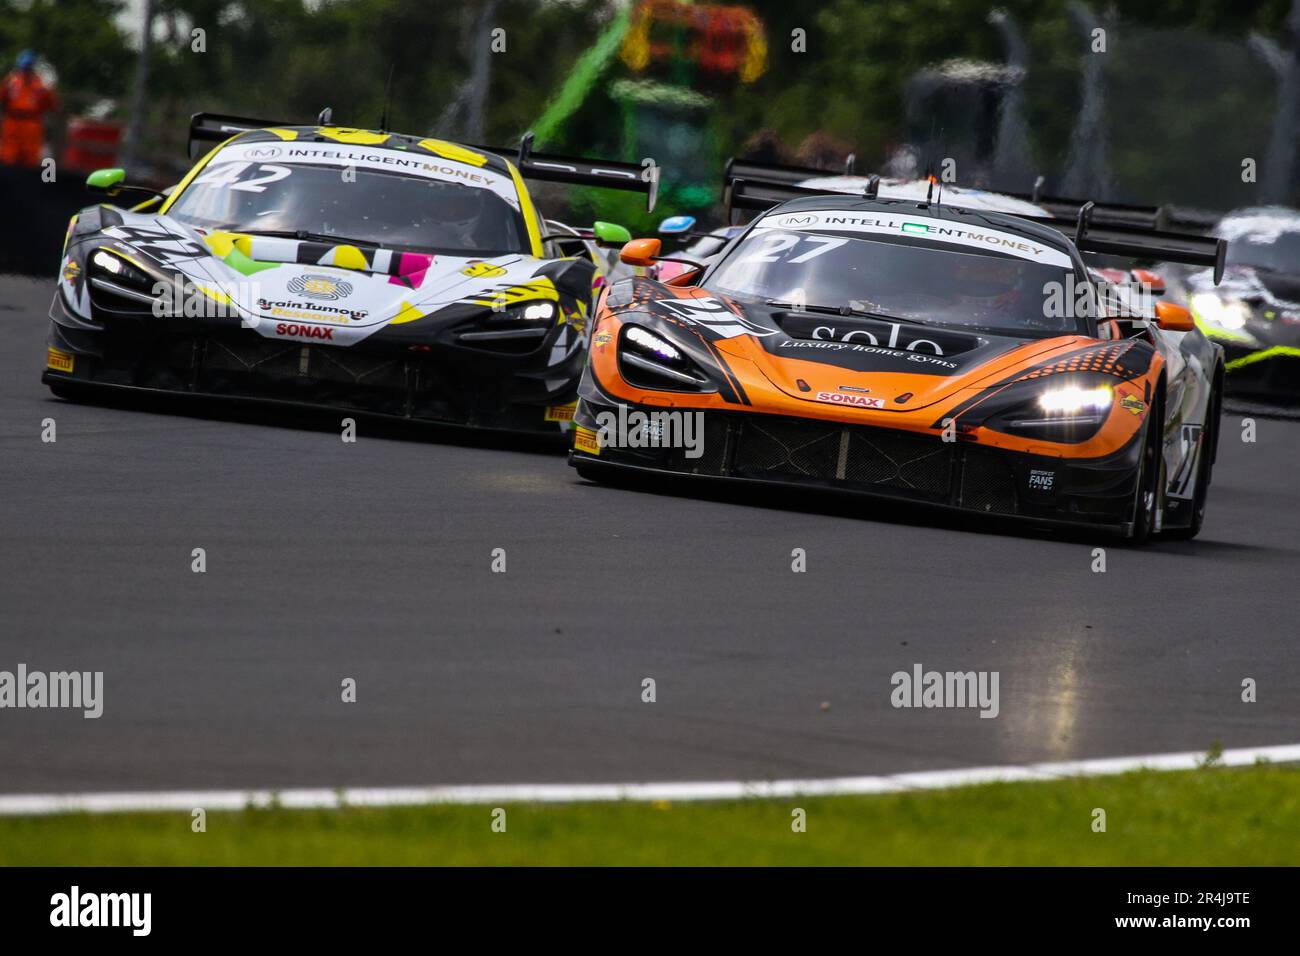 Donington Park circuit, Leicestershire. 28 May 2023. The #42 RACE LAB McLaren 720S GT3 Evo driven by Iain Campbell & James Kell GT3 Silver-Am class challenges The #27 Optimum Motorsport McLaren 720S GT3 Evo driven by Mark Radcliffe & Rob Bell GT3 Pro-Am class during round 4 of the Intelligent Money British GT Championship at Donington Park circuit, Leicestershire. 28 May 2023. Credit: Jurek Biegus/Alamy Live News Stock Photo